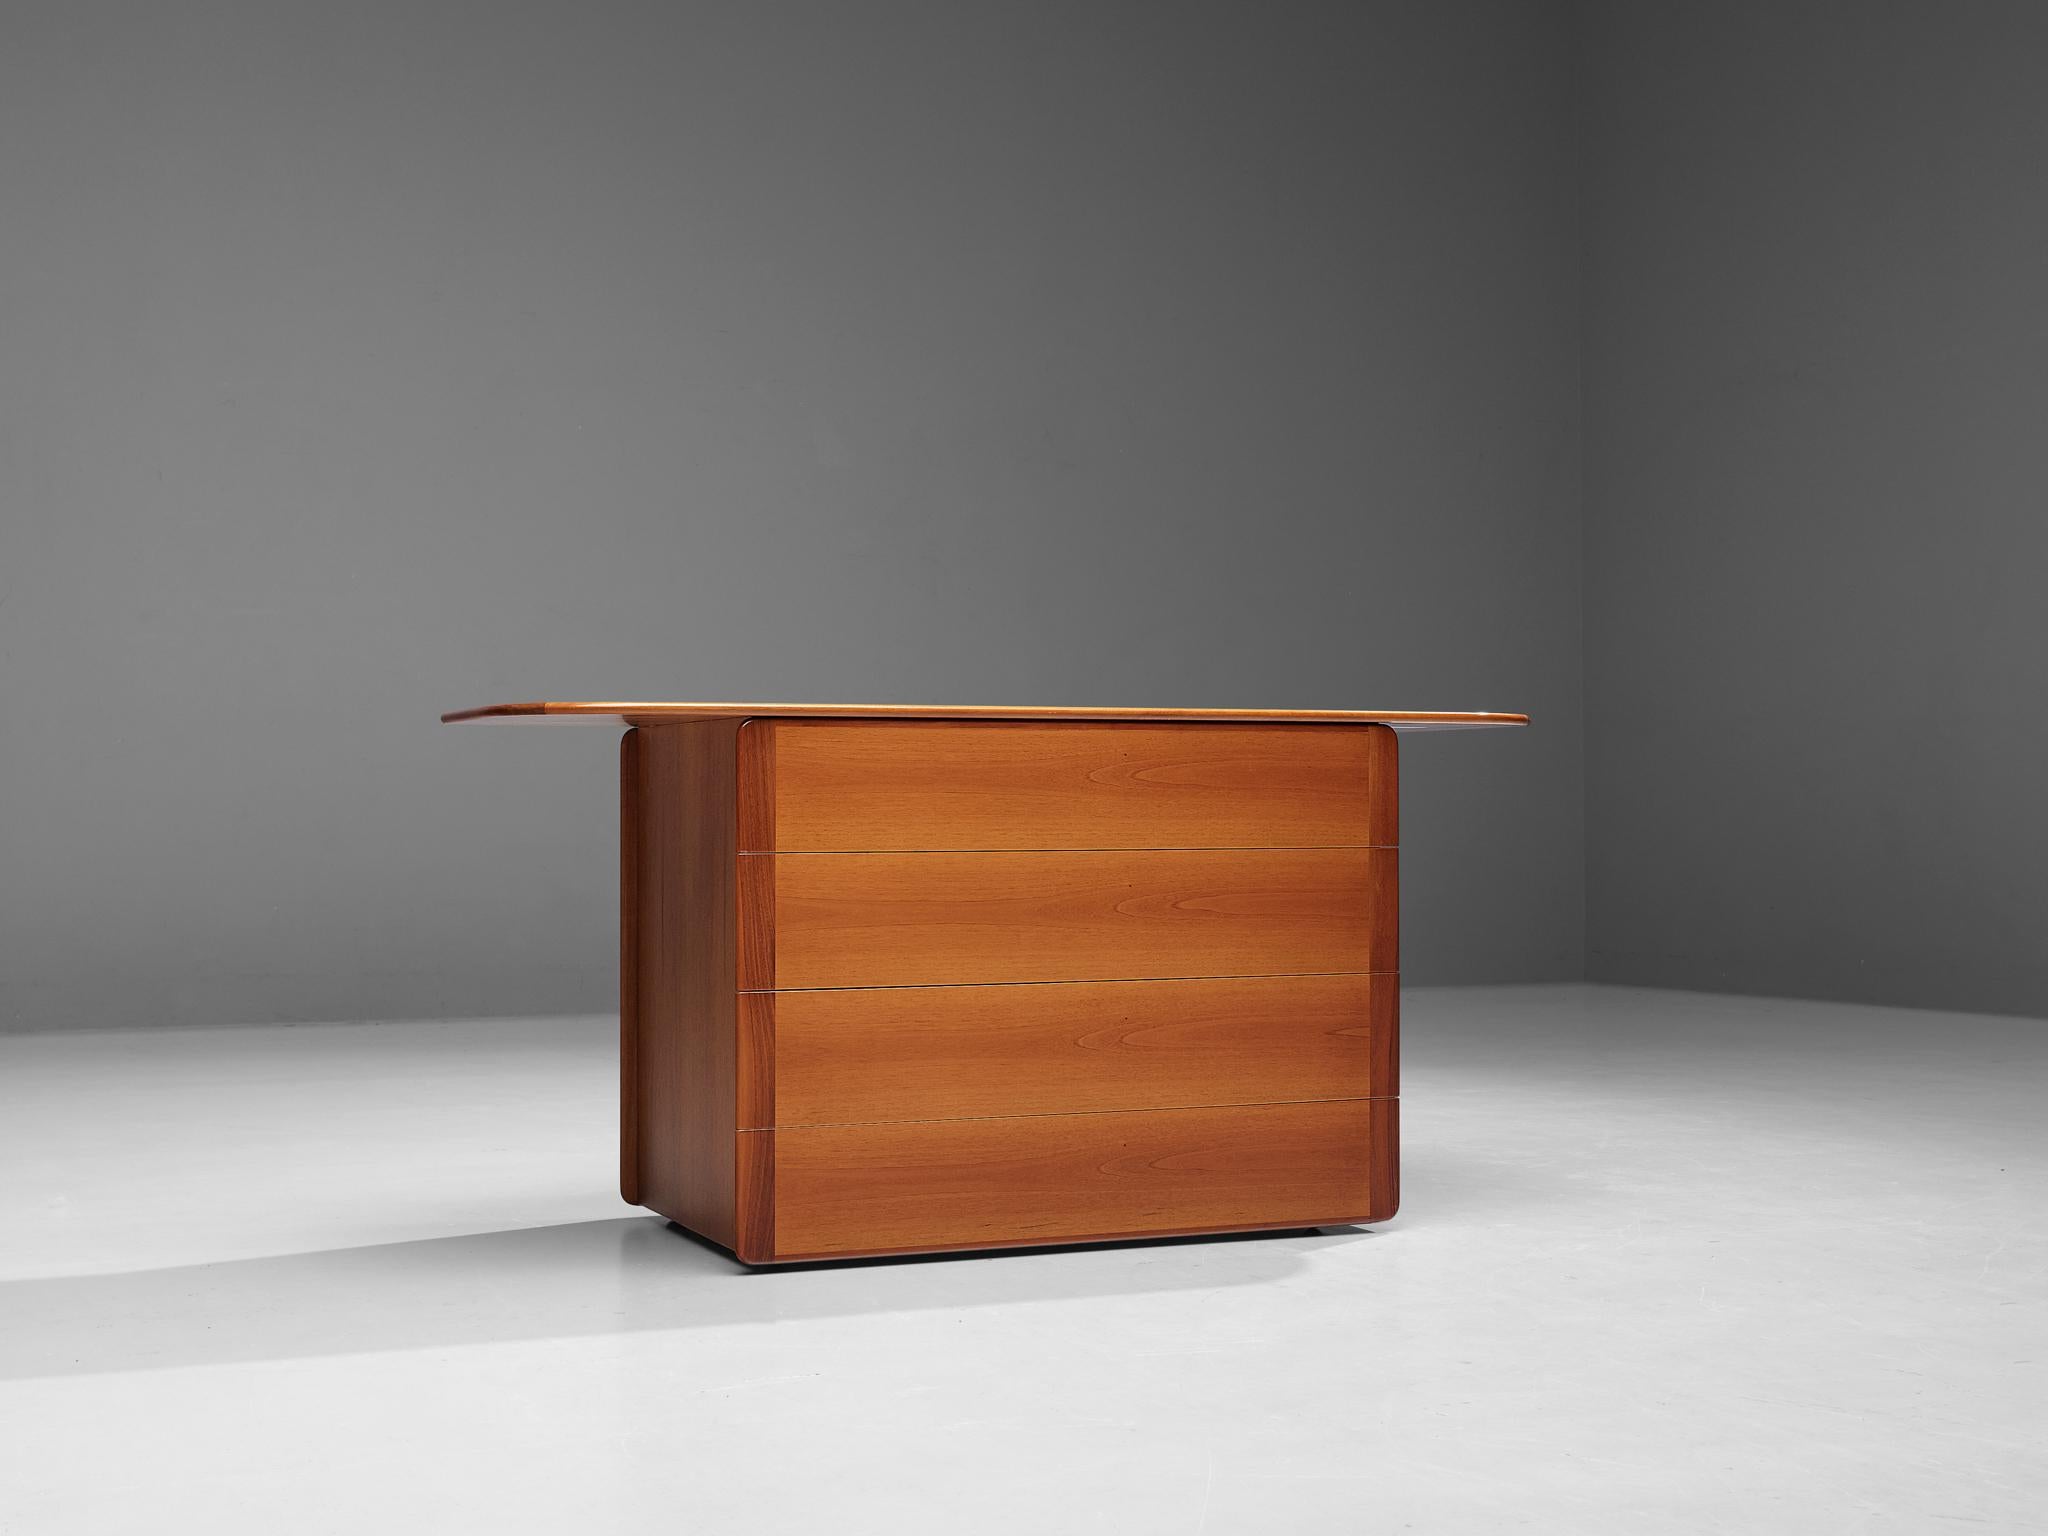 Afra e Tobia Scarpa for Molteni, cabinet model ‘Mid’, walnut, wood, Italy, 1980.

This well-designed chest of drawers features a modern and clean aesthetics based on a solid construction executed in solely honest, wooden materials. The designer duo